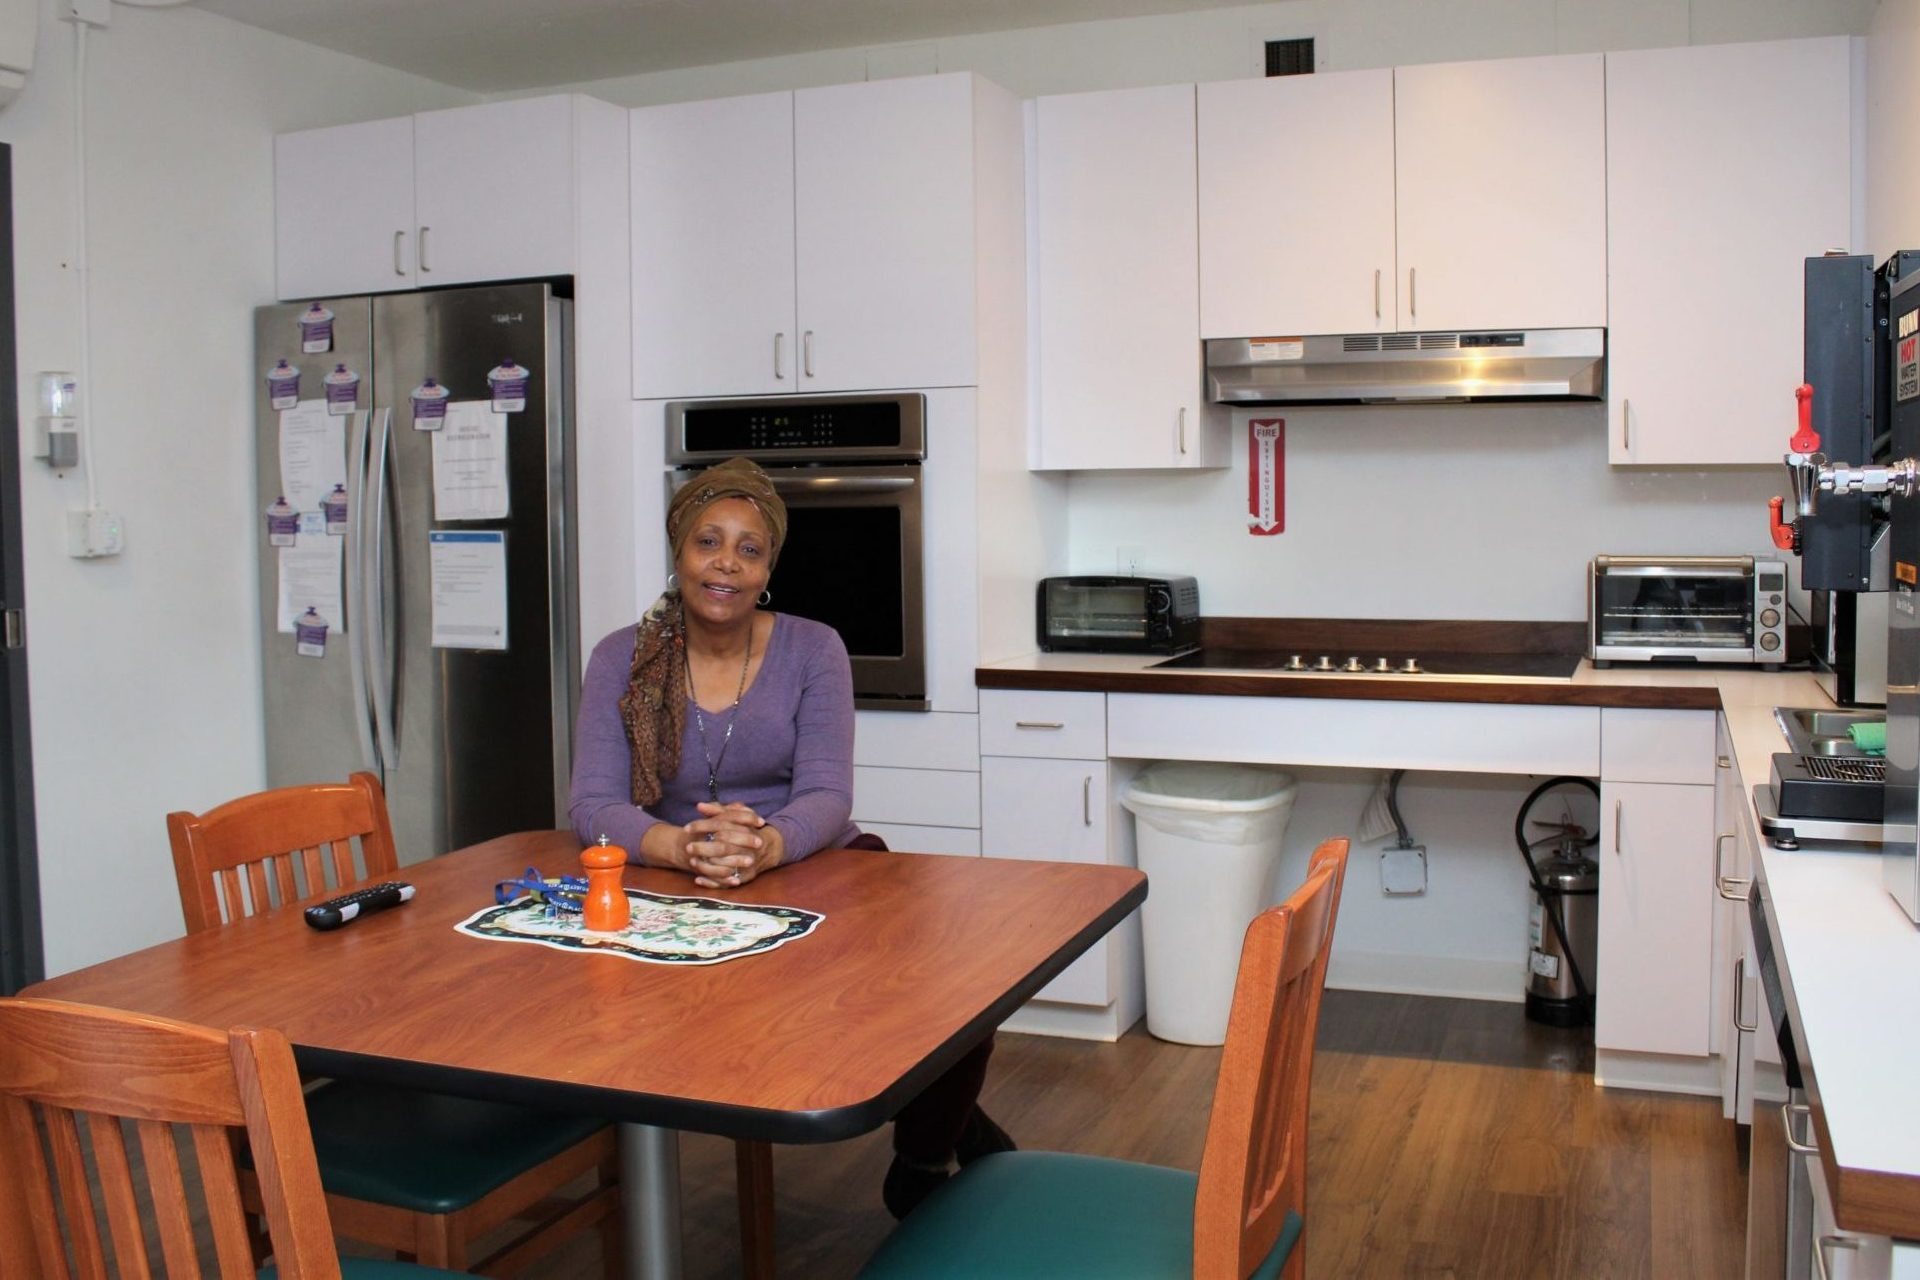 Yolette sitting in the kitchen of Betty's Place - our transitional housing program